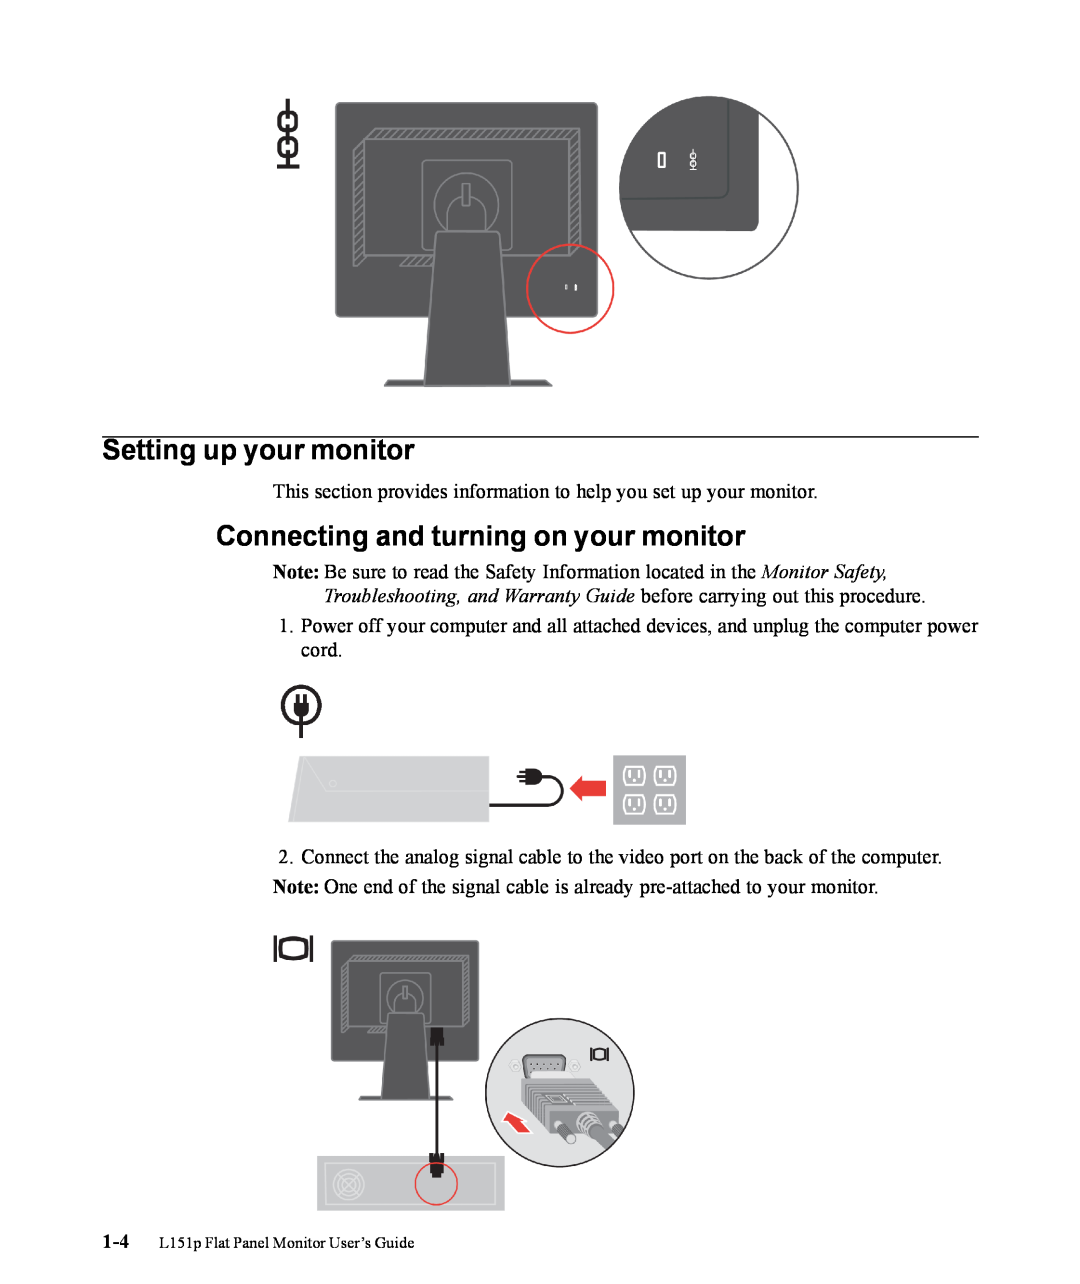 Lenovo 9205-HG2 Setting up your monitor, Connecting and turning on your monitor, 1-4 L151p Flat Panel Monitor User’s Guide 